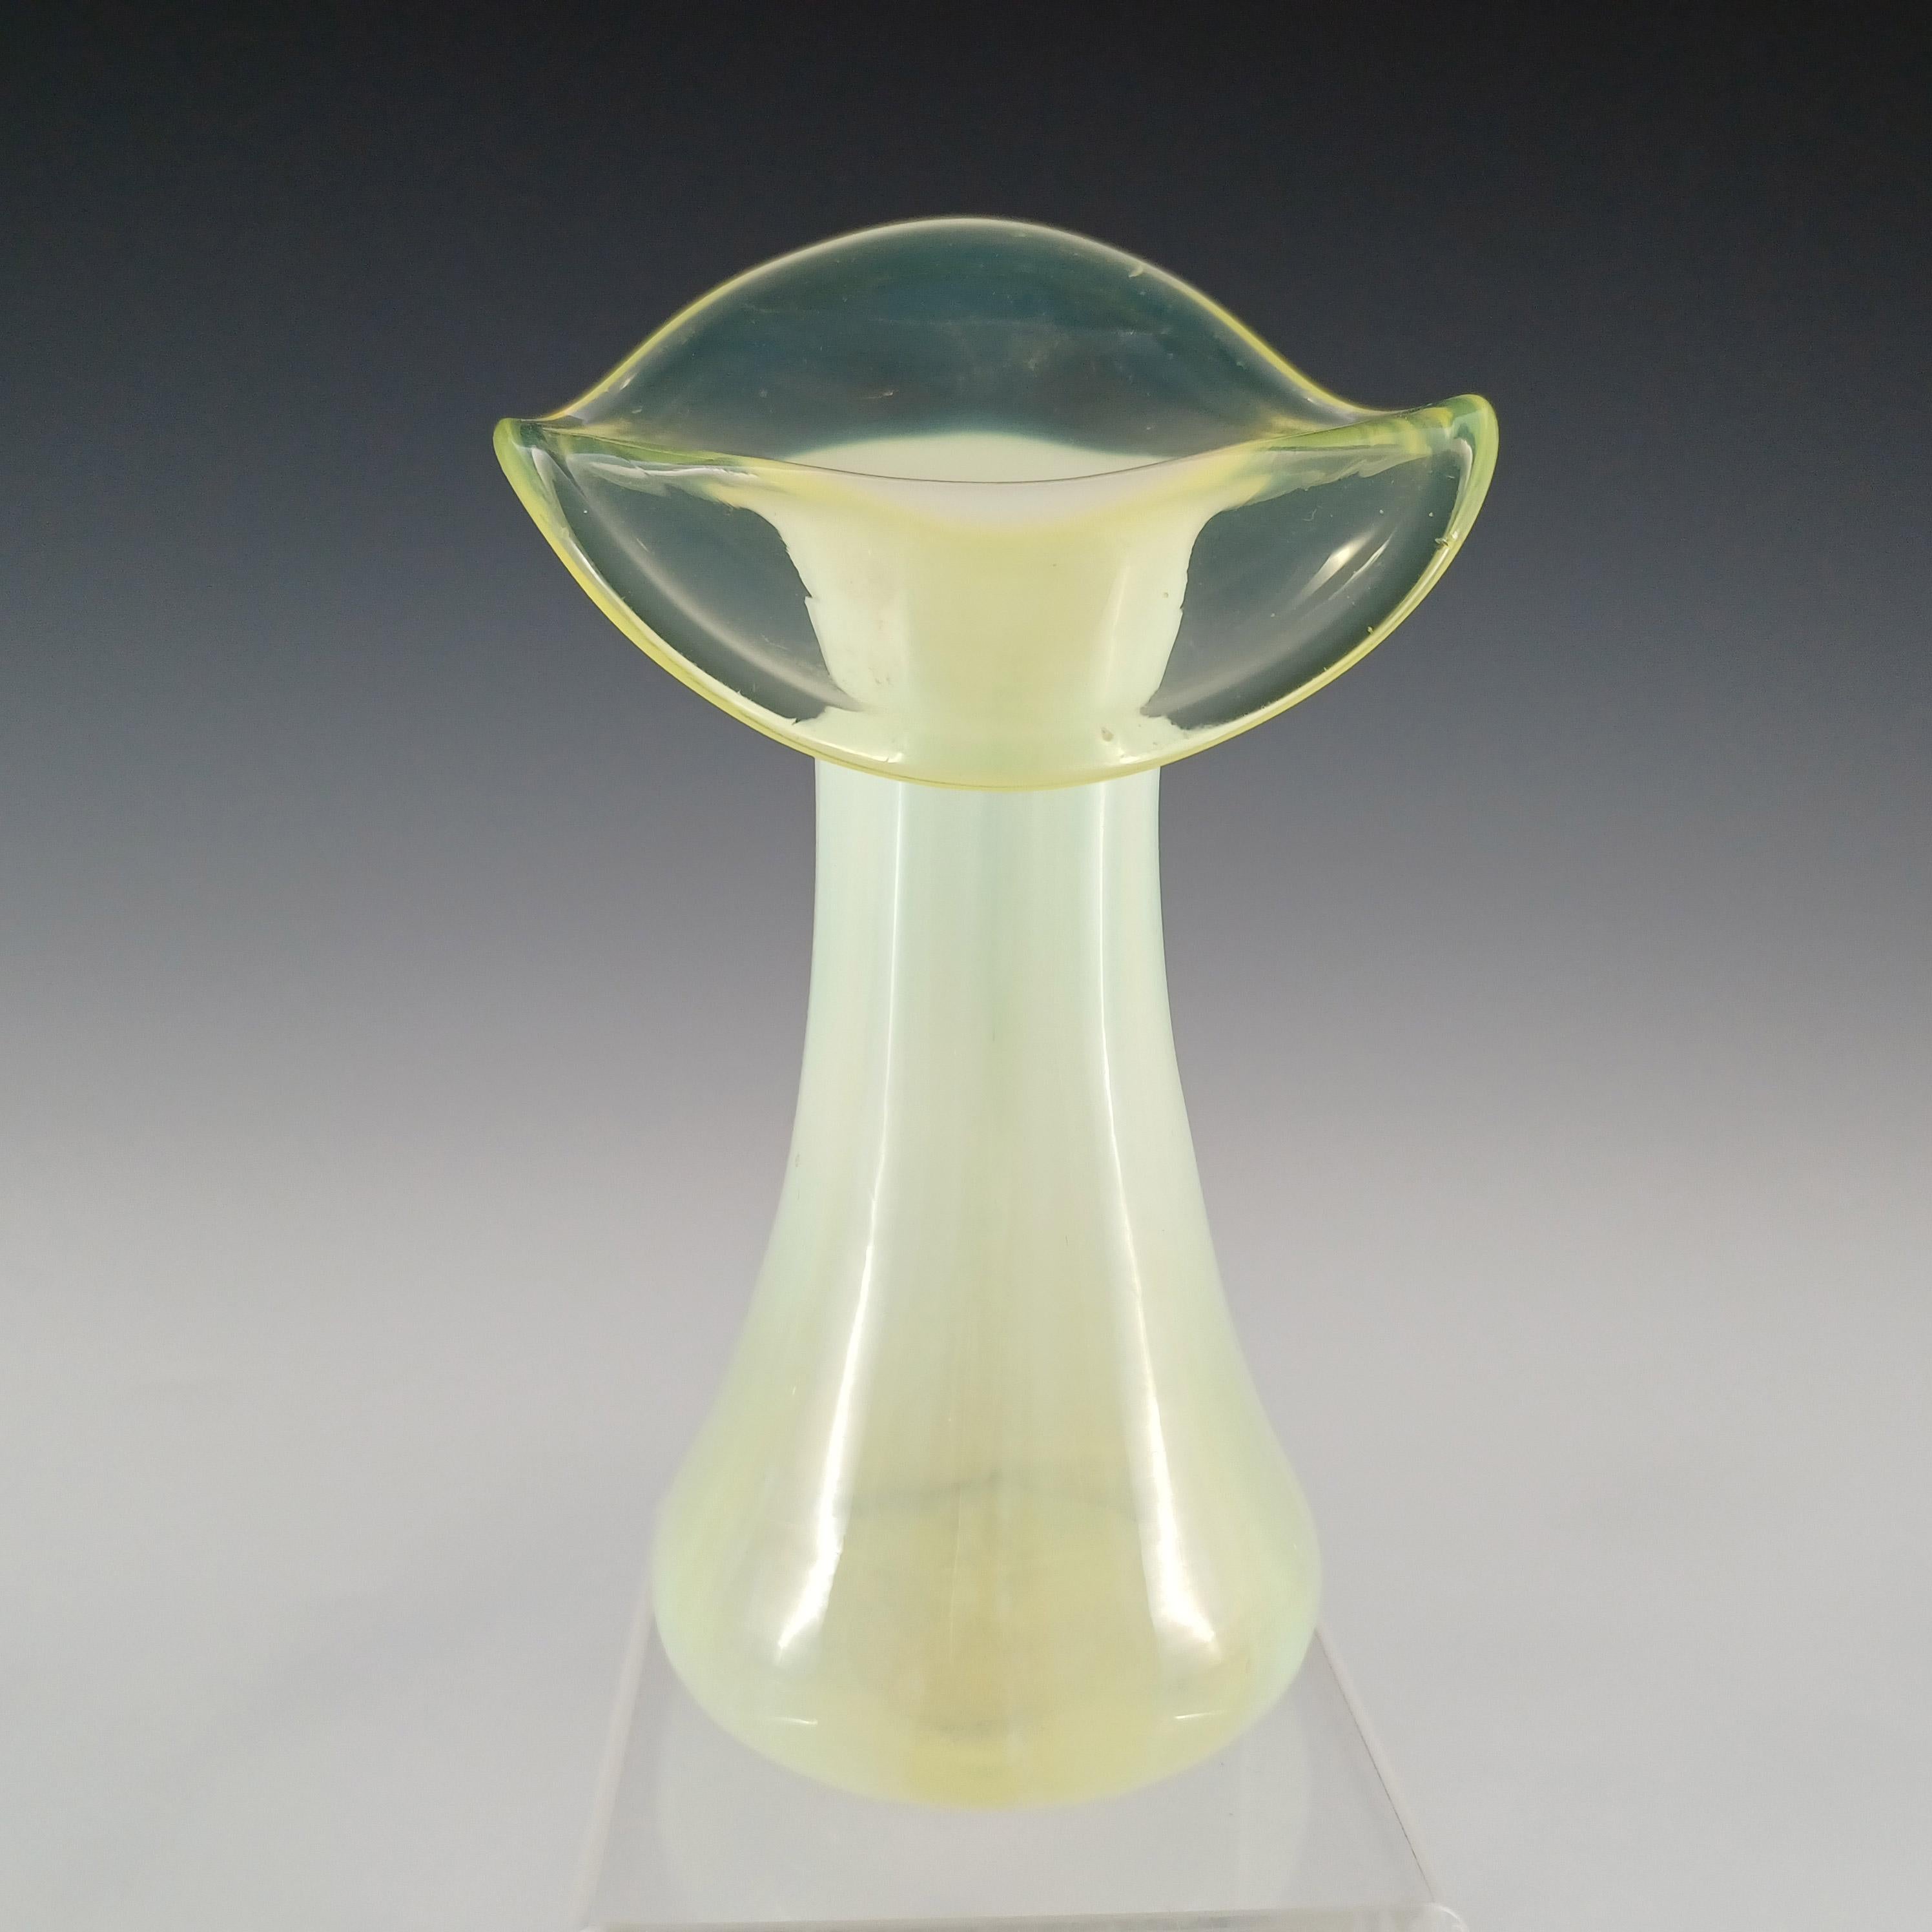 A wonderful Victorian yellow green vaseline glass jack-in-the-pulpit vase, with vertical striped opalescent body, circa 1890's. Made in uranium glass, which glows bright green in UV light.

Please note: the plastic stand is for display purposes only